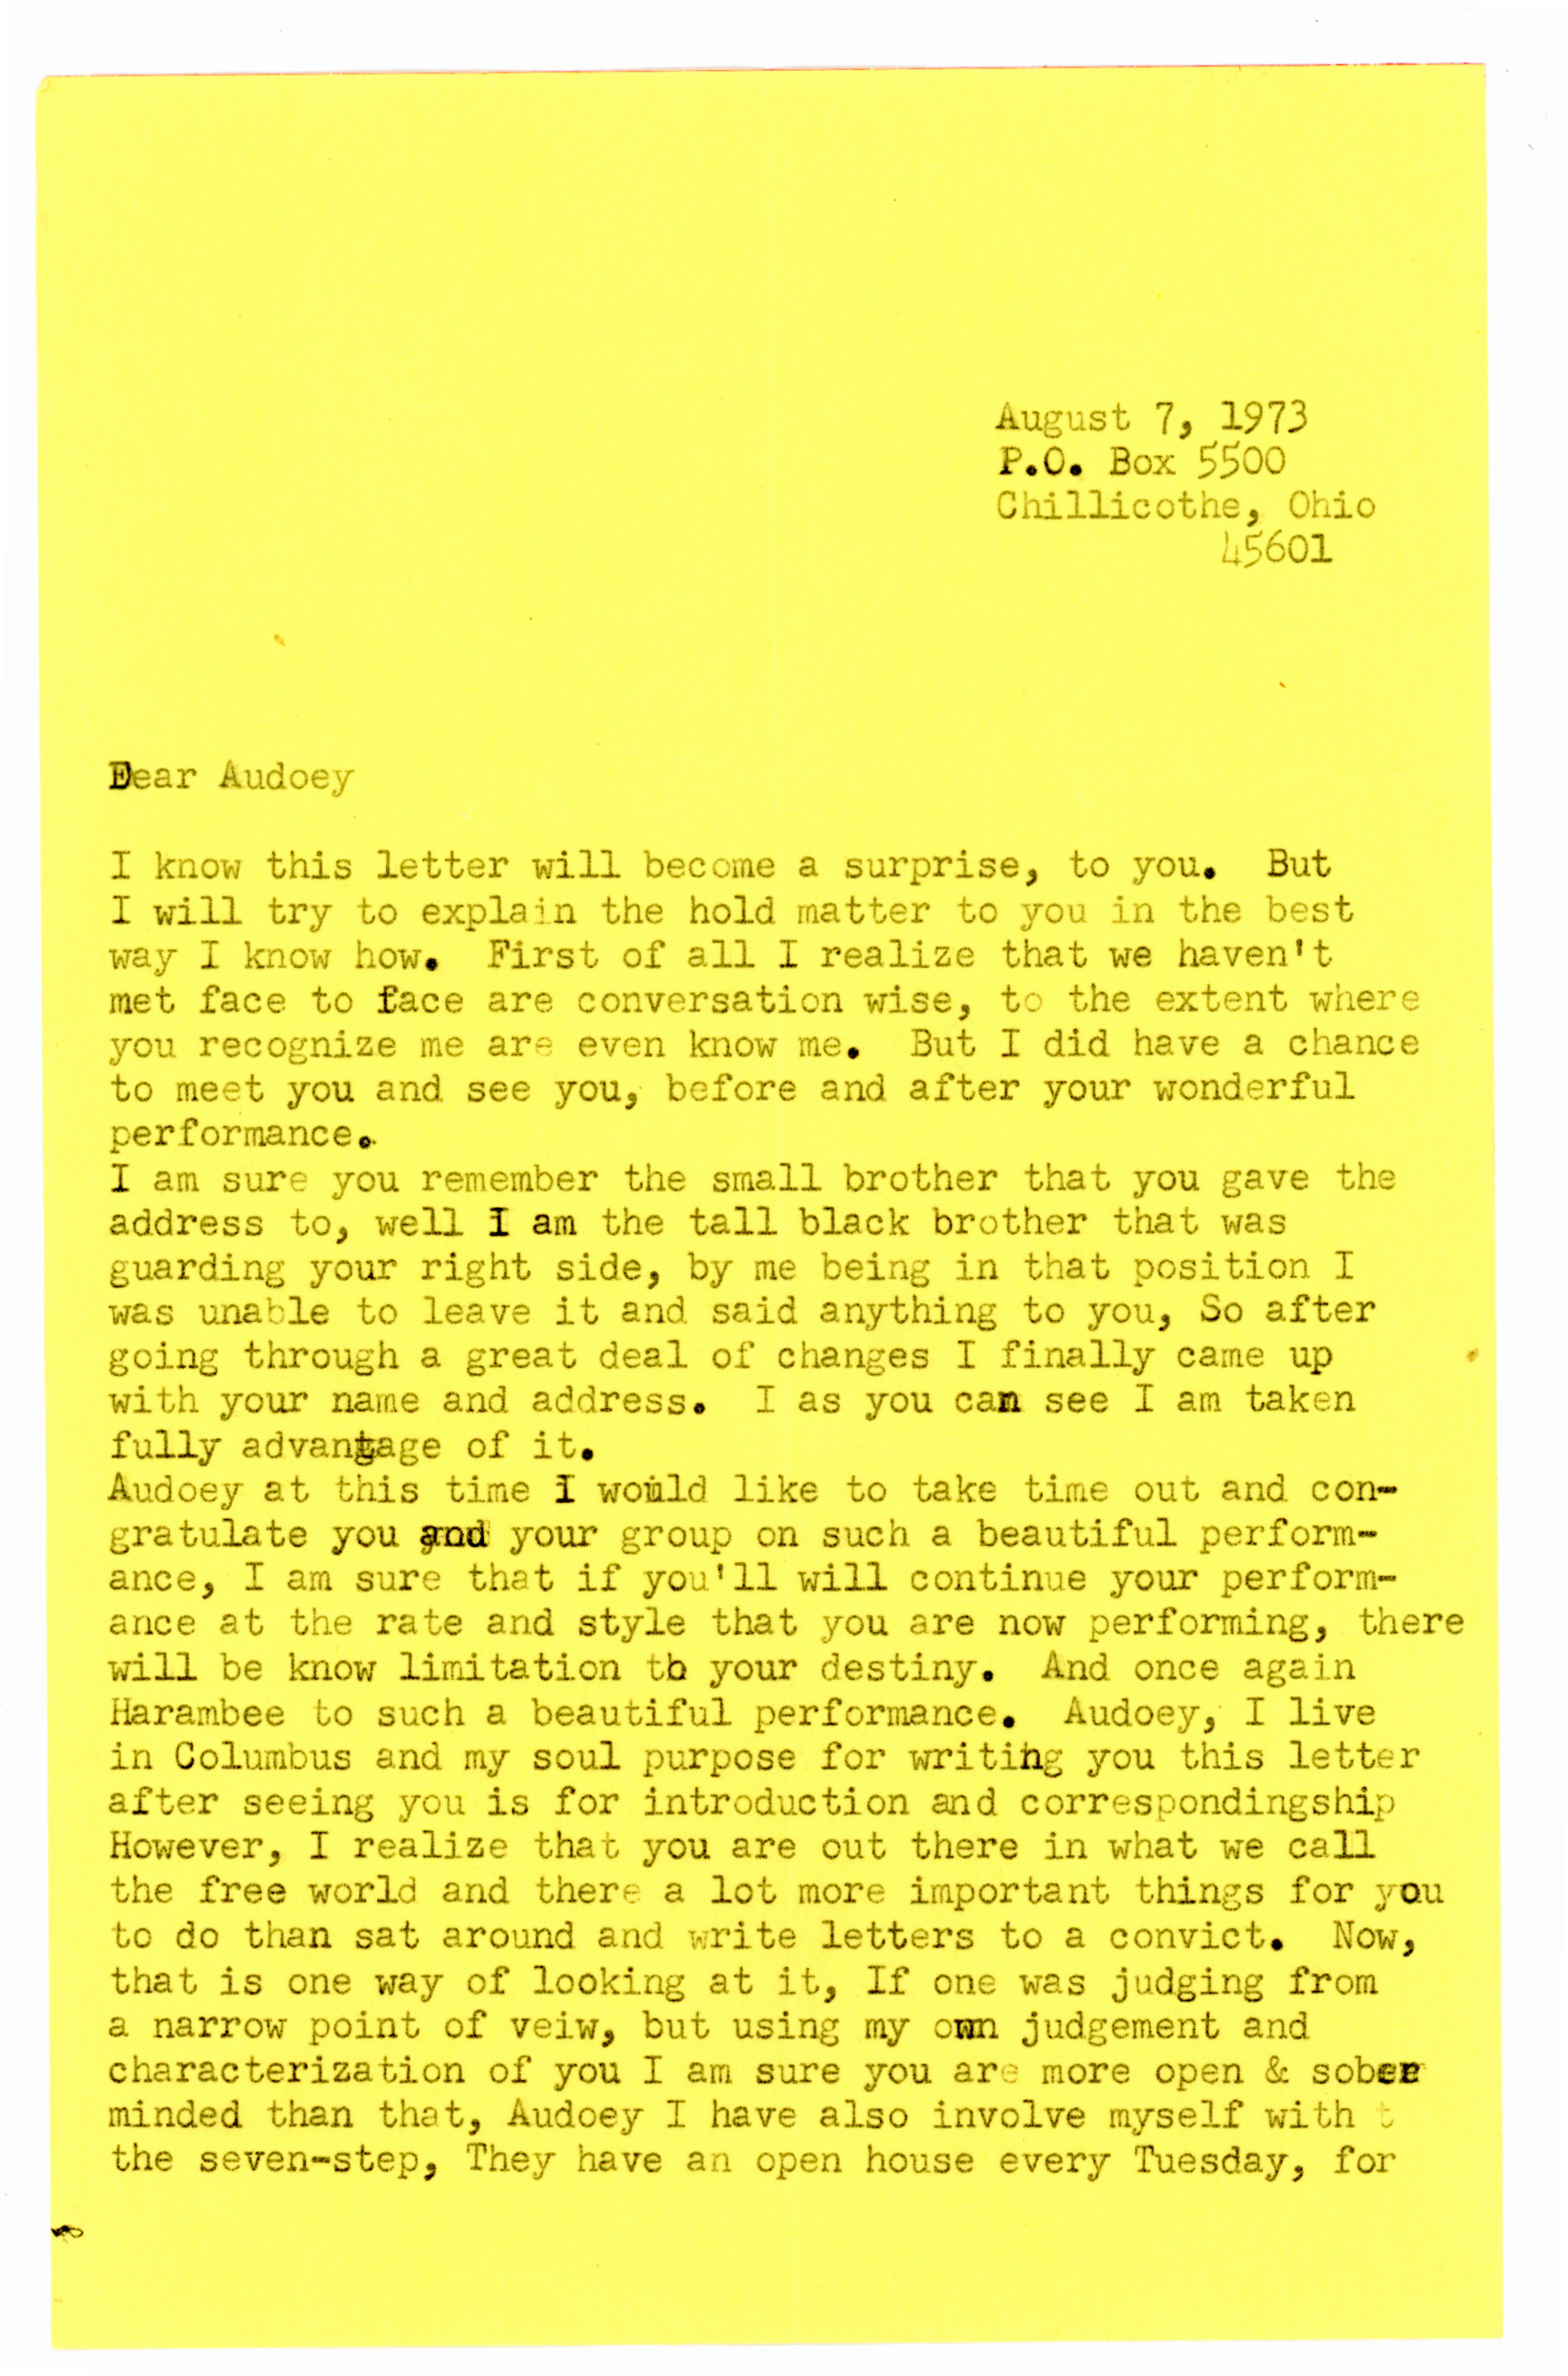 Correspondence from Arthur, a Black man imprisoned at Chillicothe Correctional Institution in Chillicothe, Ohio.